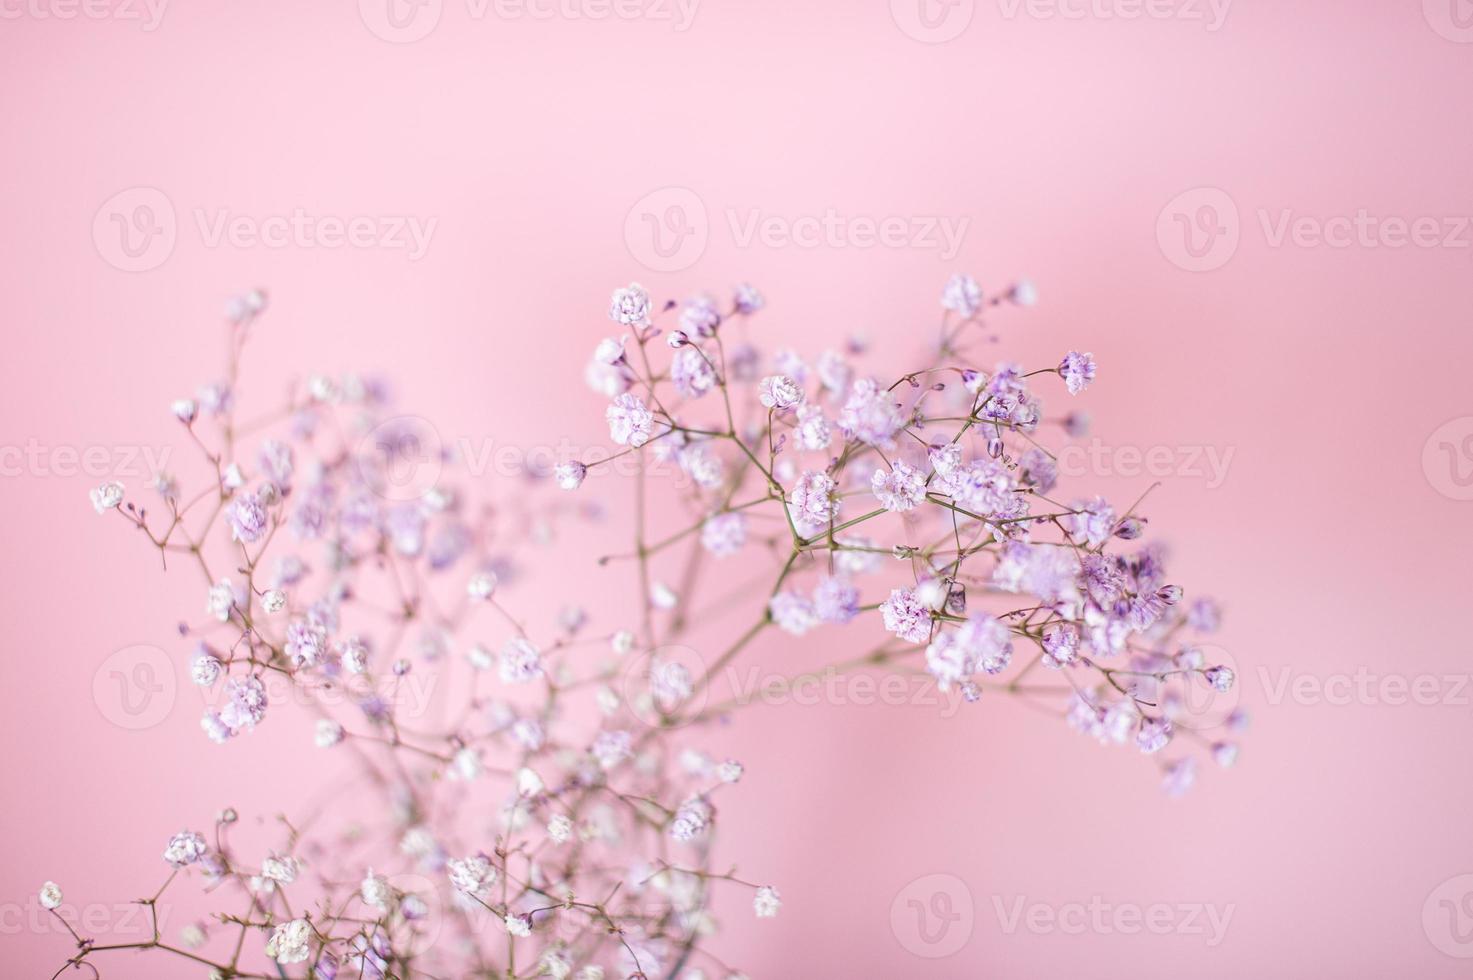 Small purple and white gypsophila flowers on a pink background photo